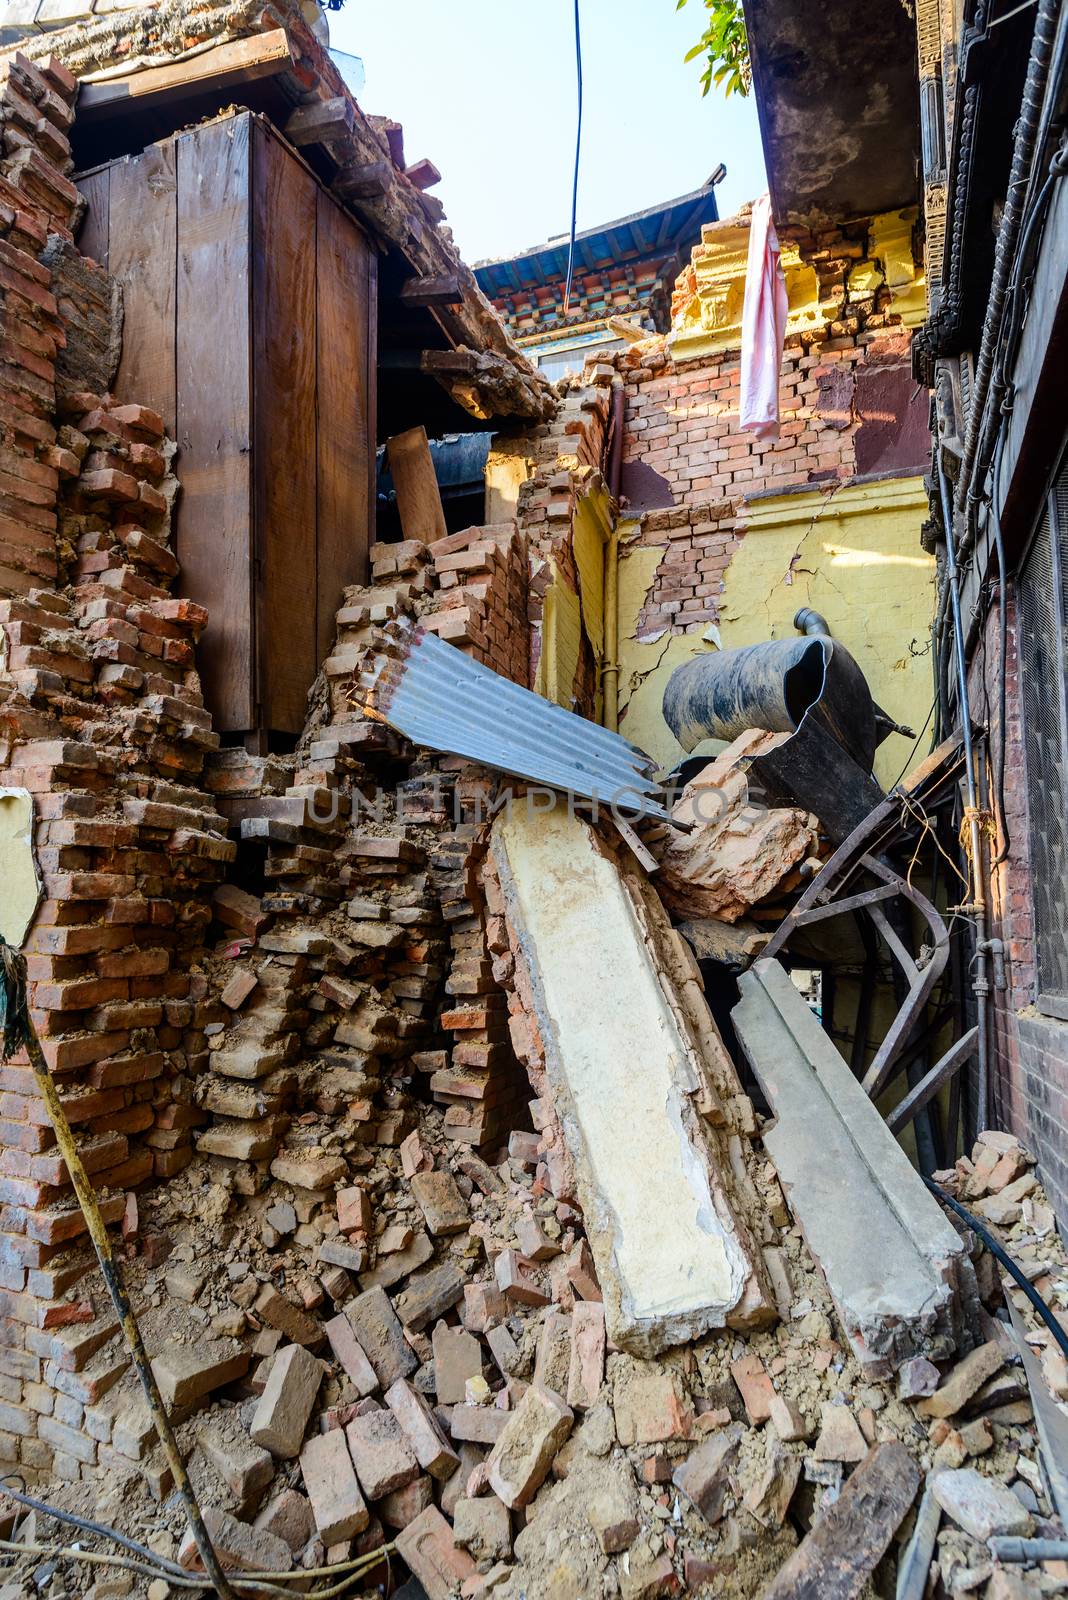 KATHMANDU, NEPAL - MAY 22, 2015: Swayambhunath, a UNESCO World Heritage Site, was severely damaged after two major earthquakes hit Nepal on April 25 and May 12, 2015.